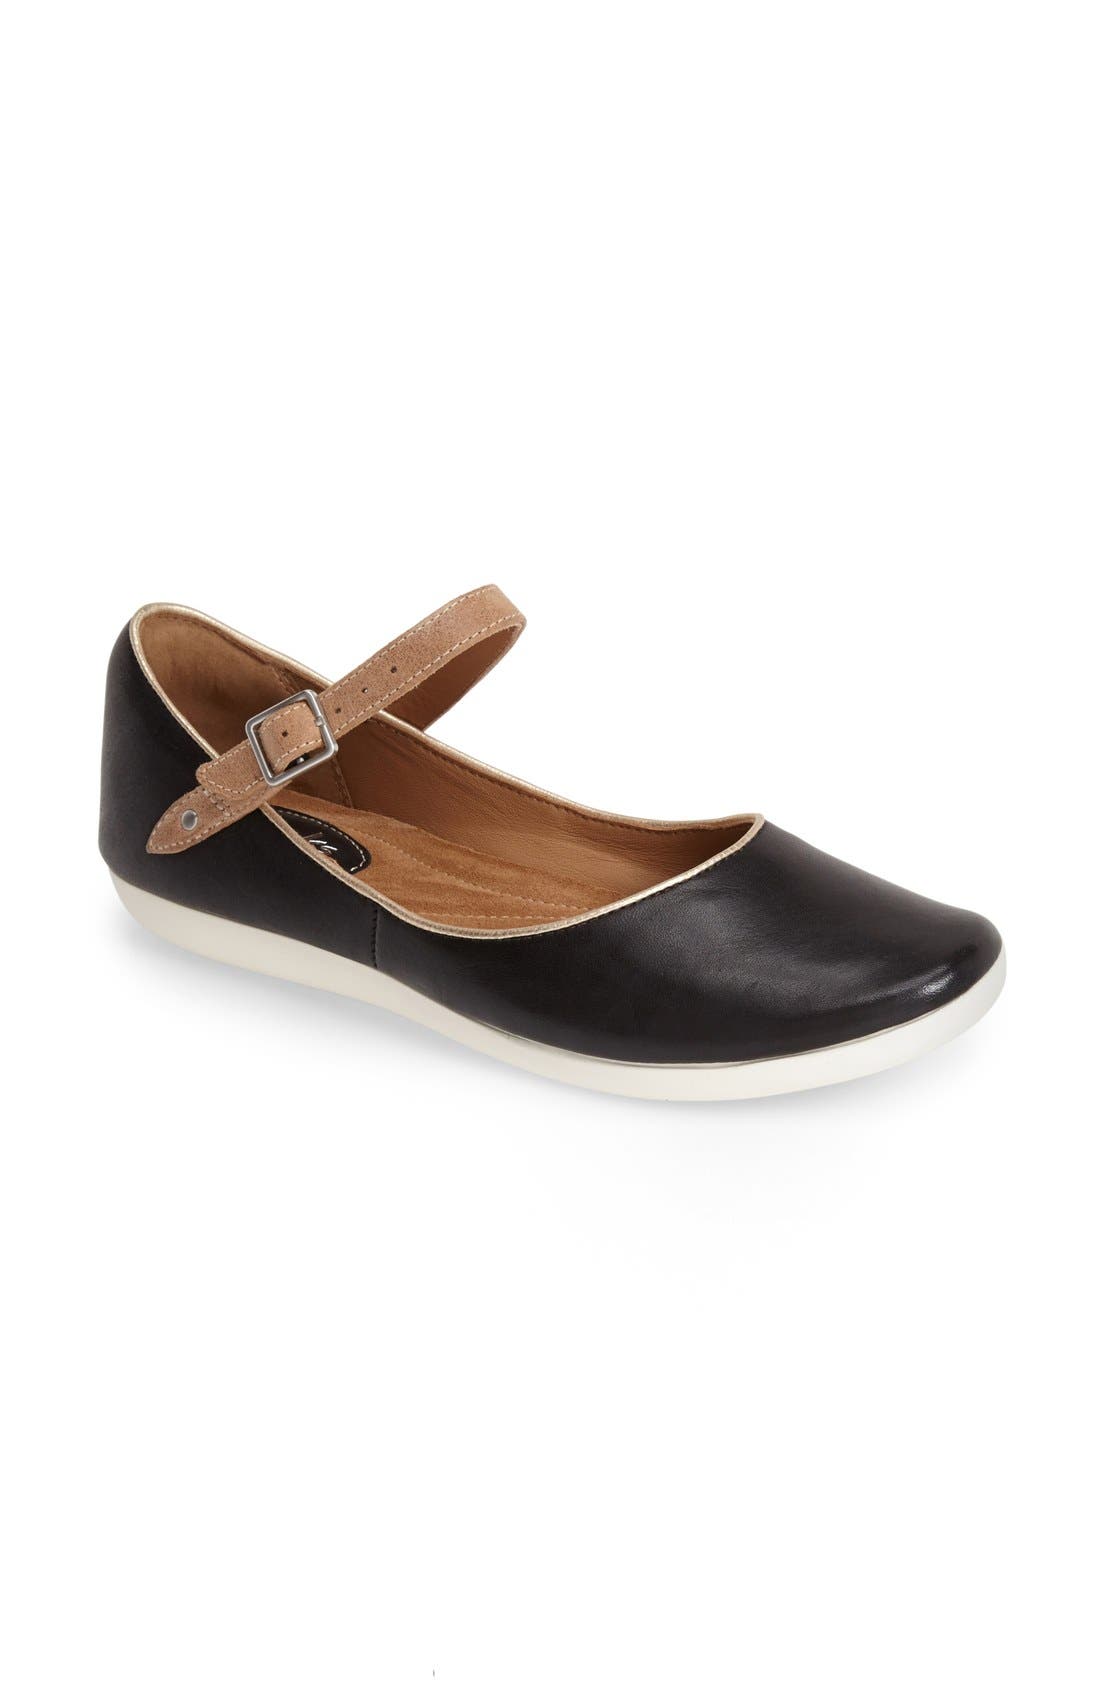 clarks mary jane ladies shoes